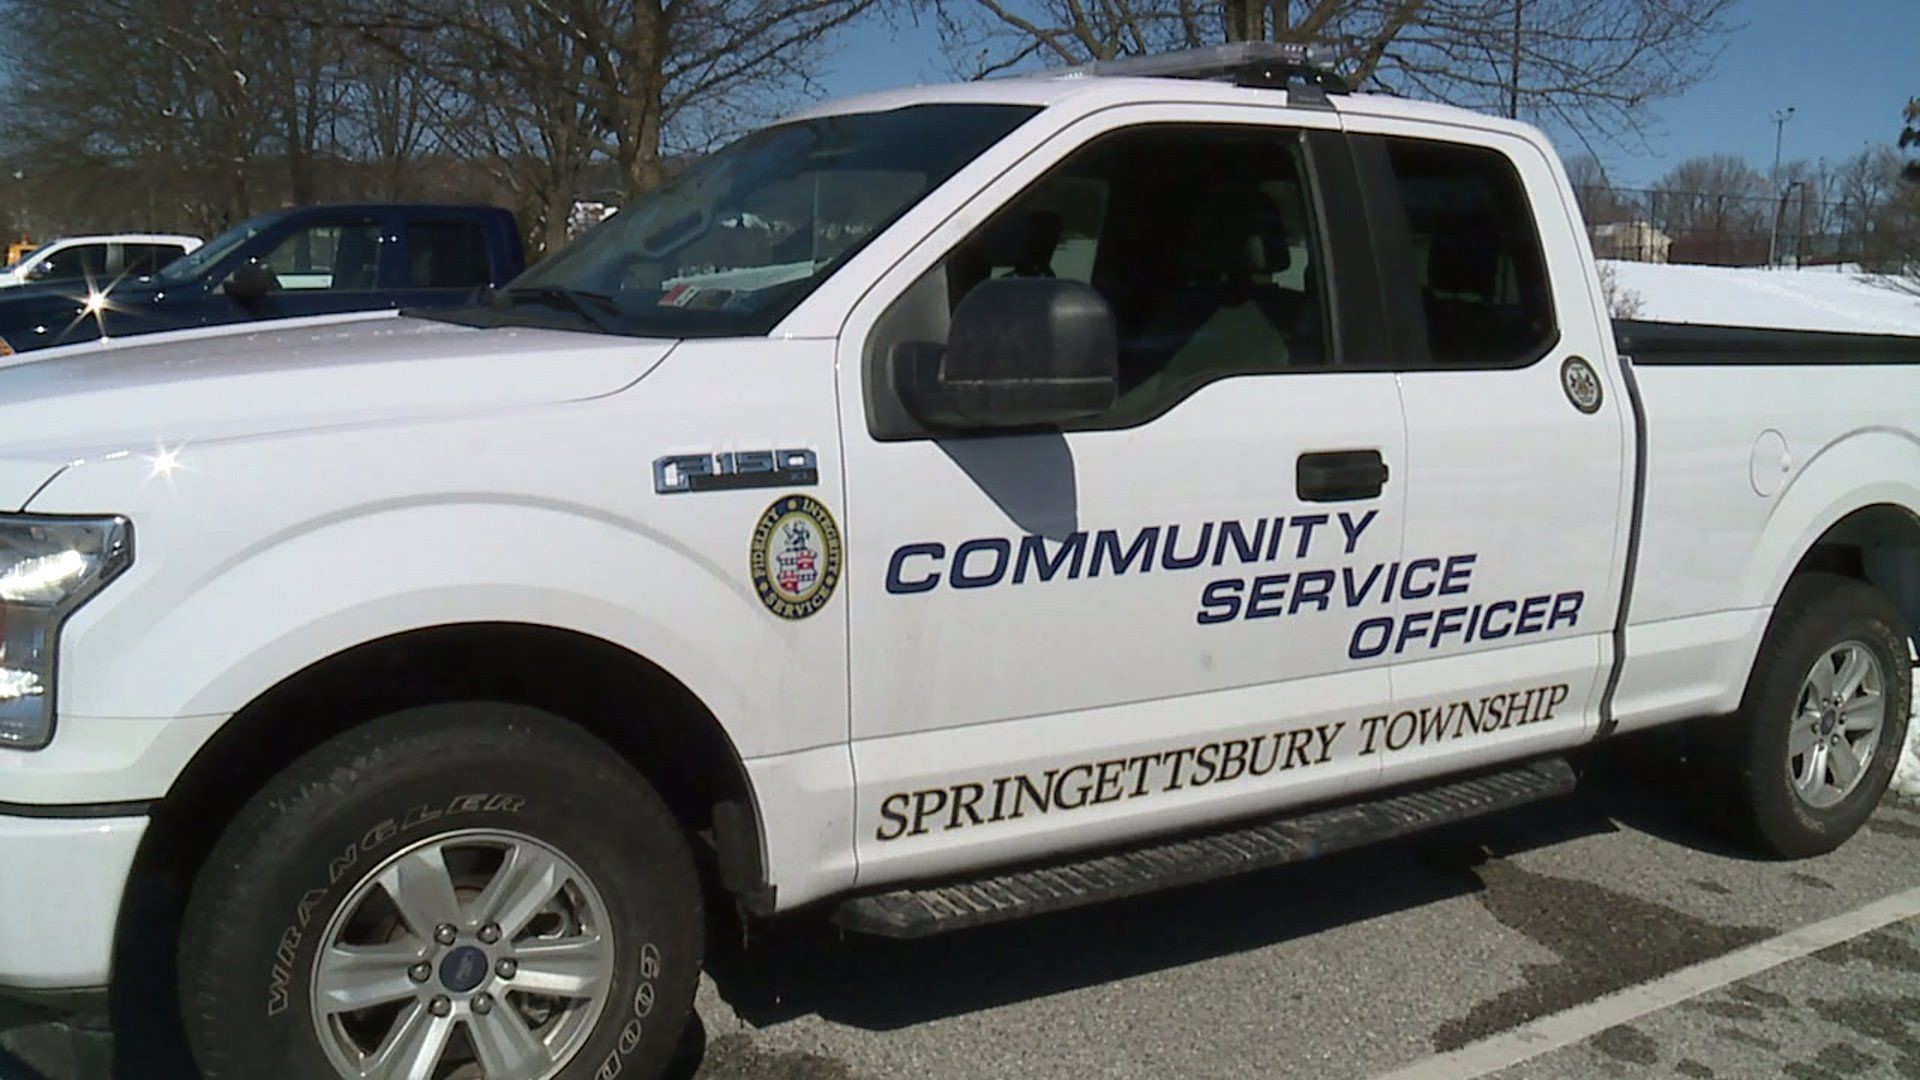 Community Service Officer in Springettsbury Township